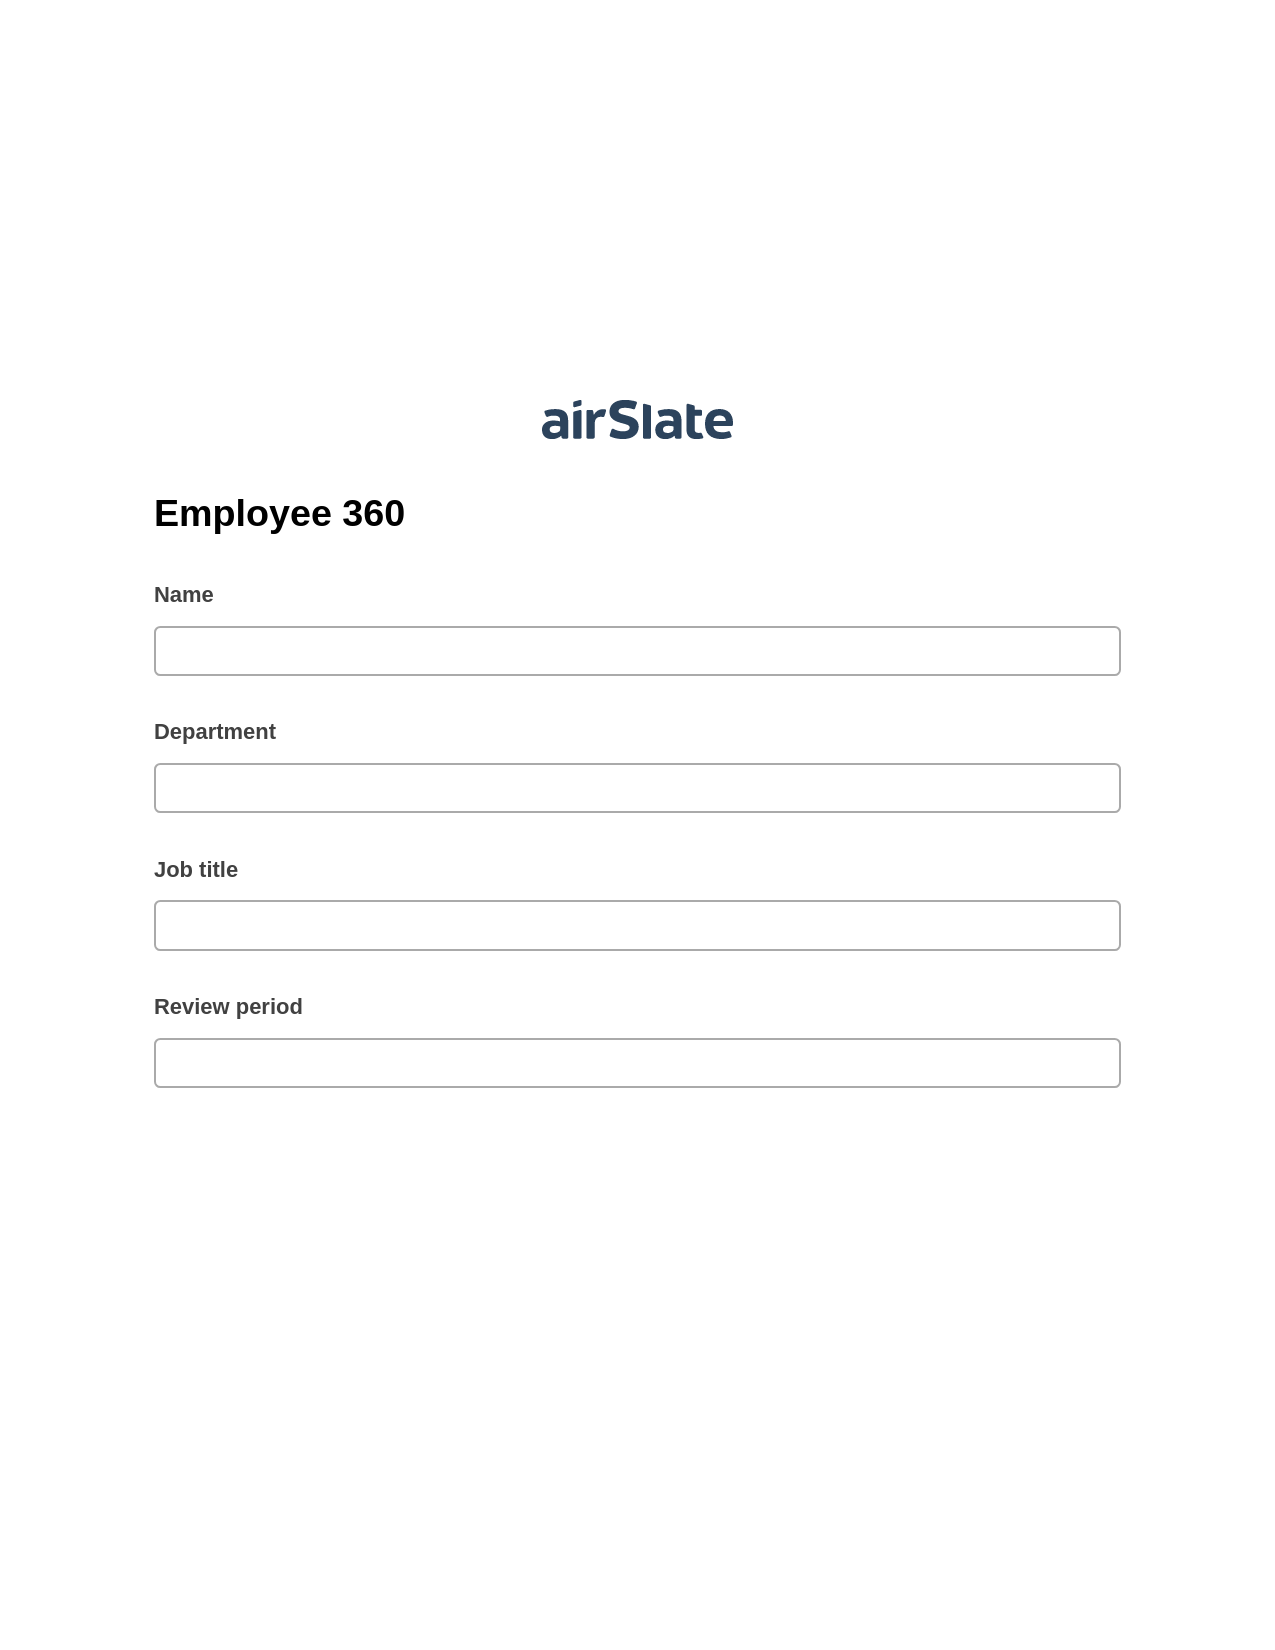 Employee 360 Pre-fill from CSV File Bot, Export to MS Dynamics 365 Bot, Archive to Google Drive Bot